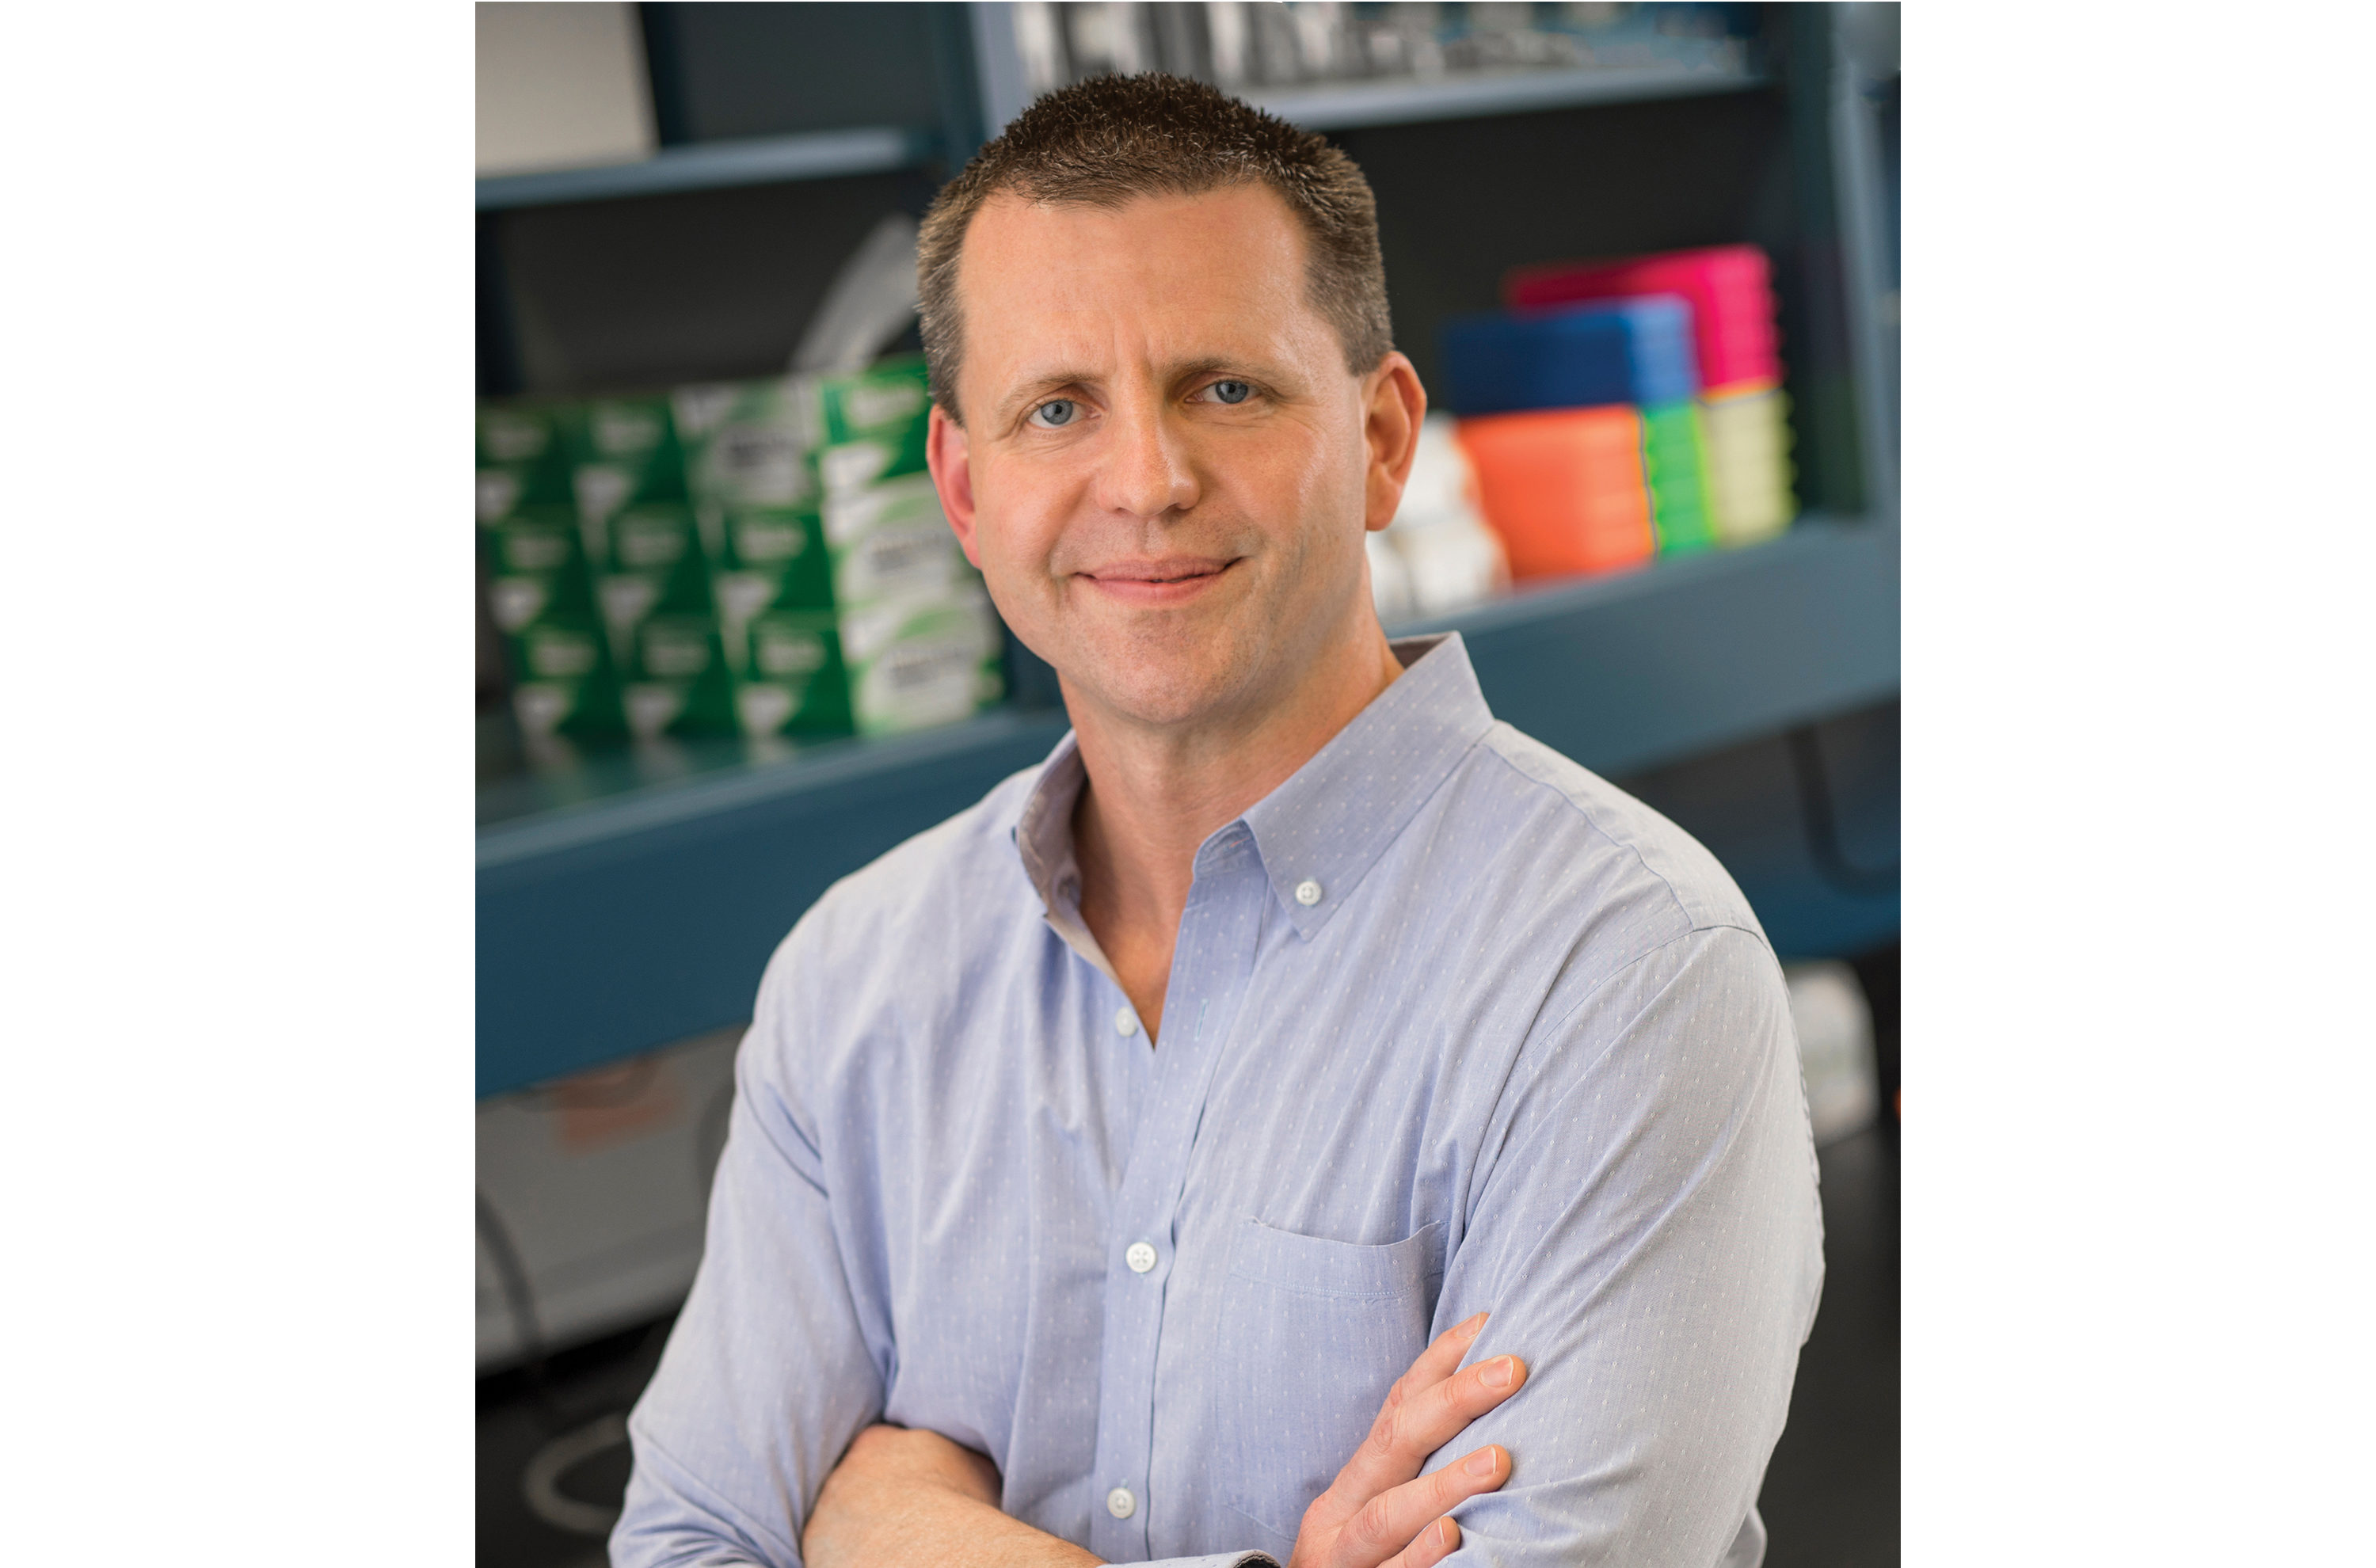 Alan Tackett, Ph.D., was awarded a National Cancer Institute grant of $1.75 million to support his ongoing research into new therapies for metatatic melanoma.